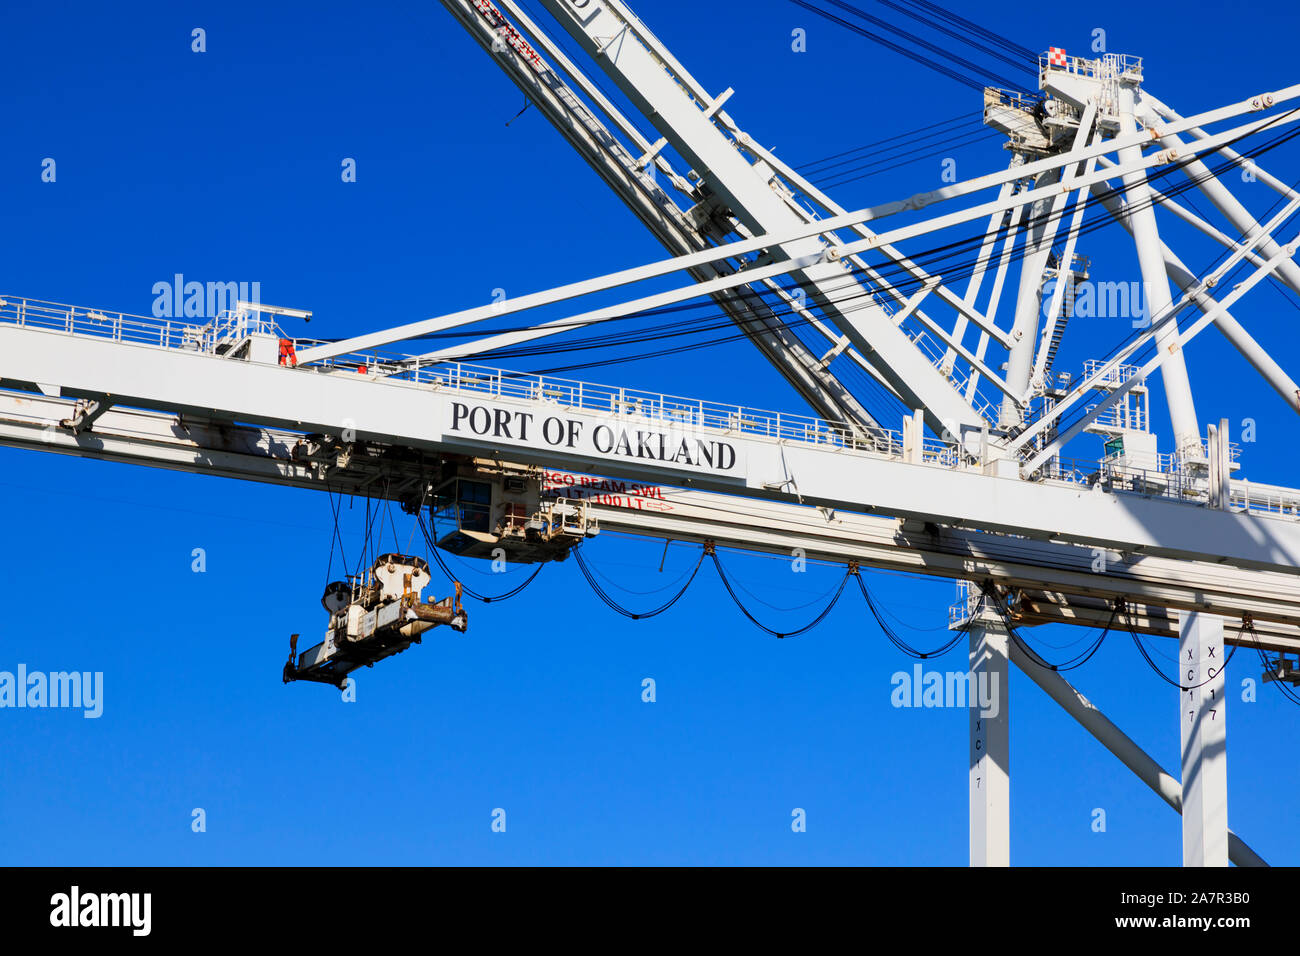 Large container crane in the Port of Oakland, Alameda county, California, United States of America Stock Photo